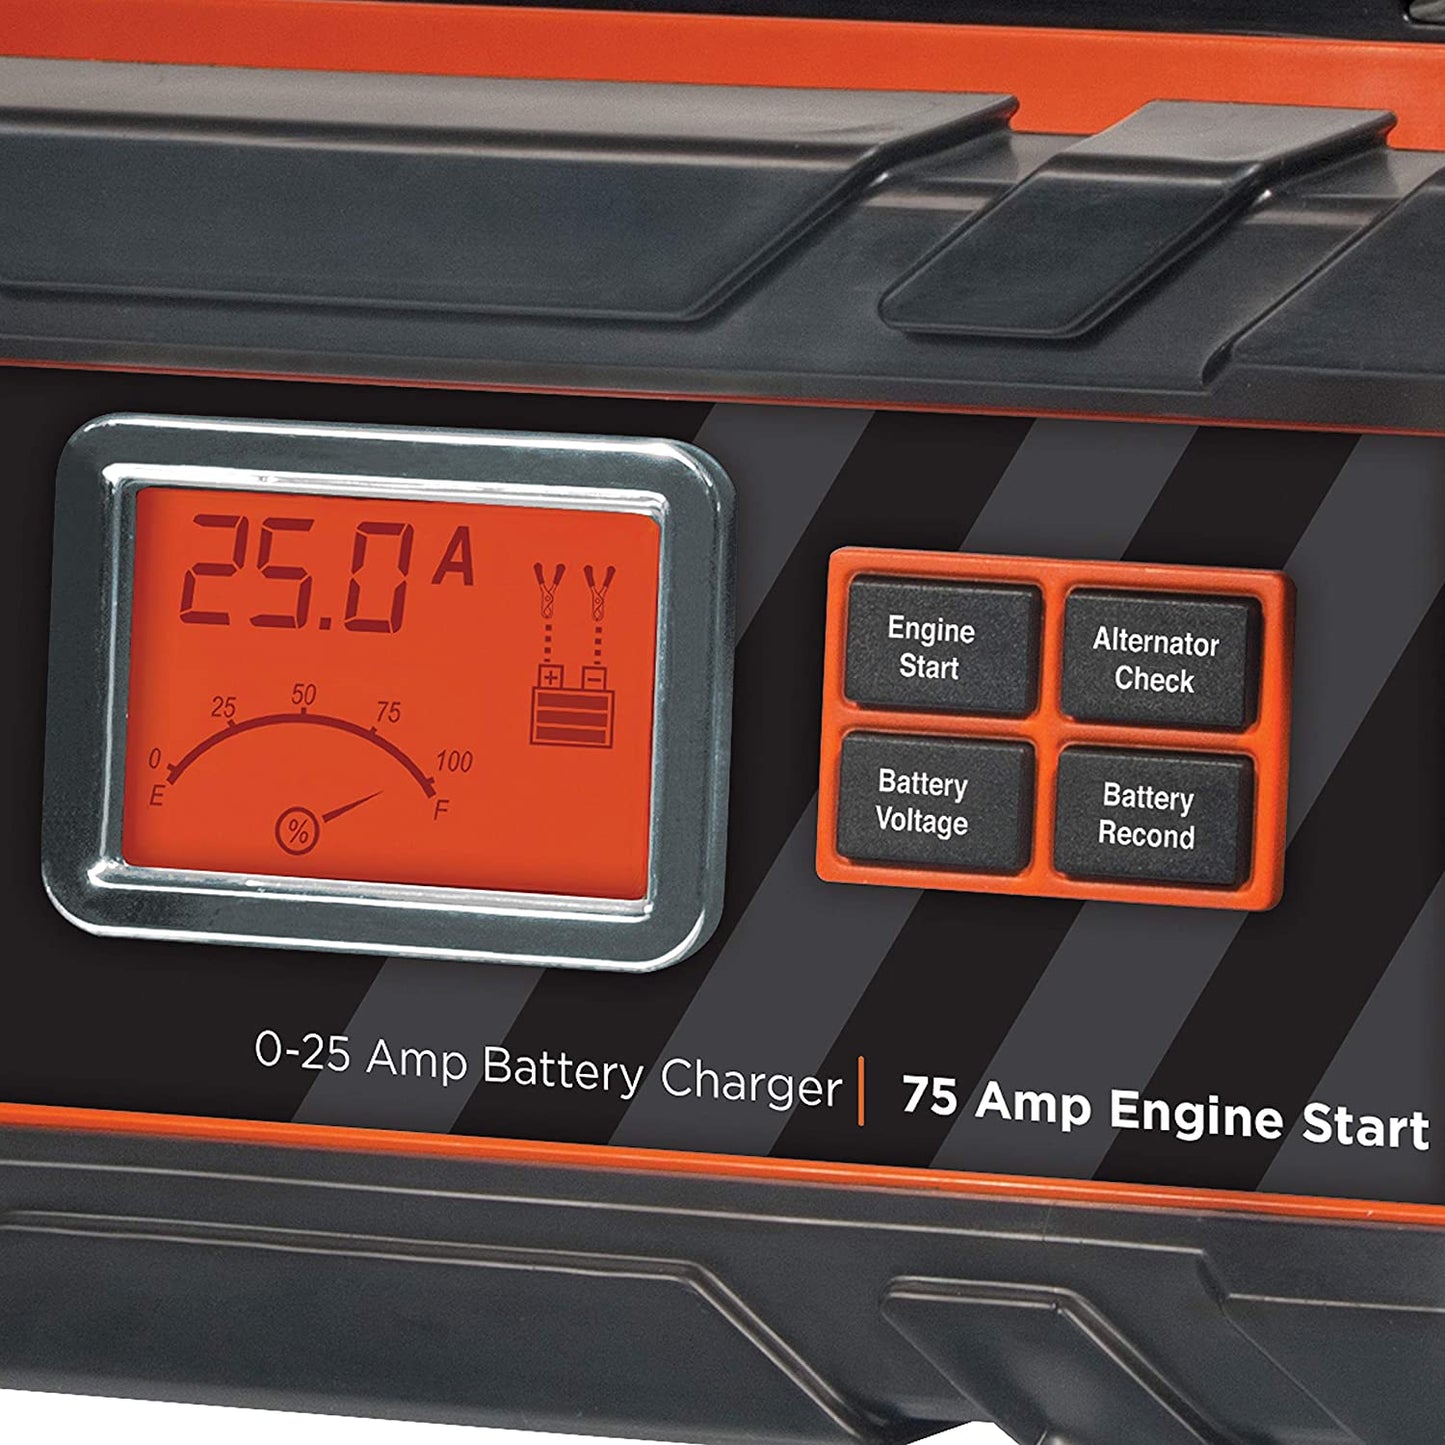 BLACK+DECKER 15 Amp Bench Battery Charger with 40 Amp Engine Start and  Alternator Check (BC15BD) - Measuring Tools & Sensors, Facebook  Marketplace